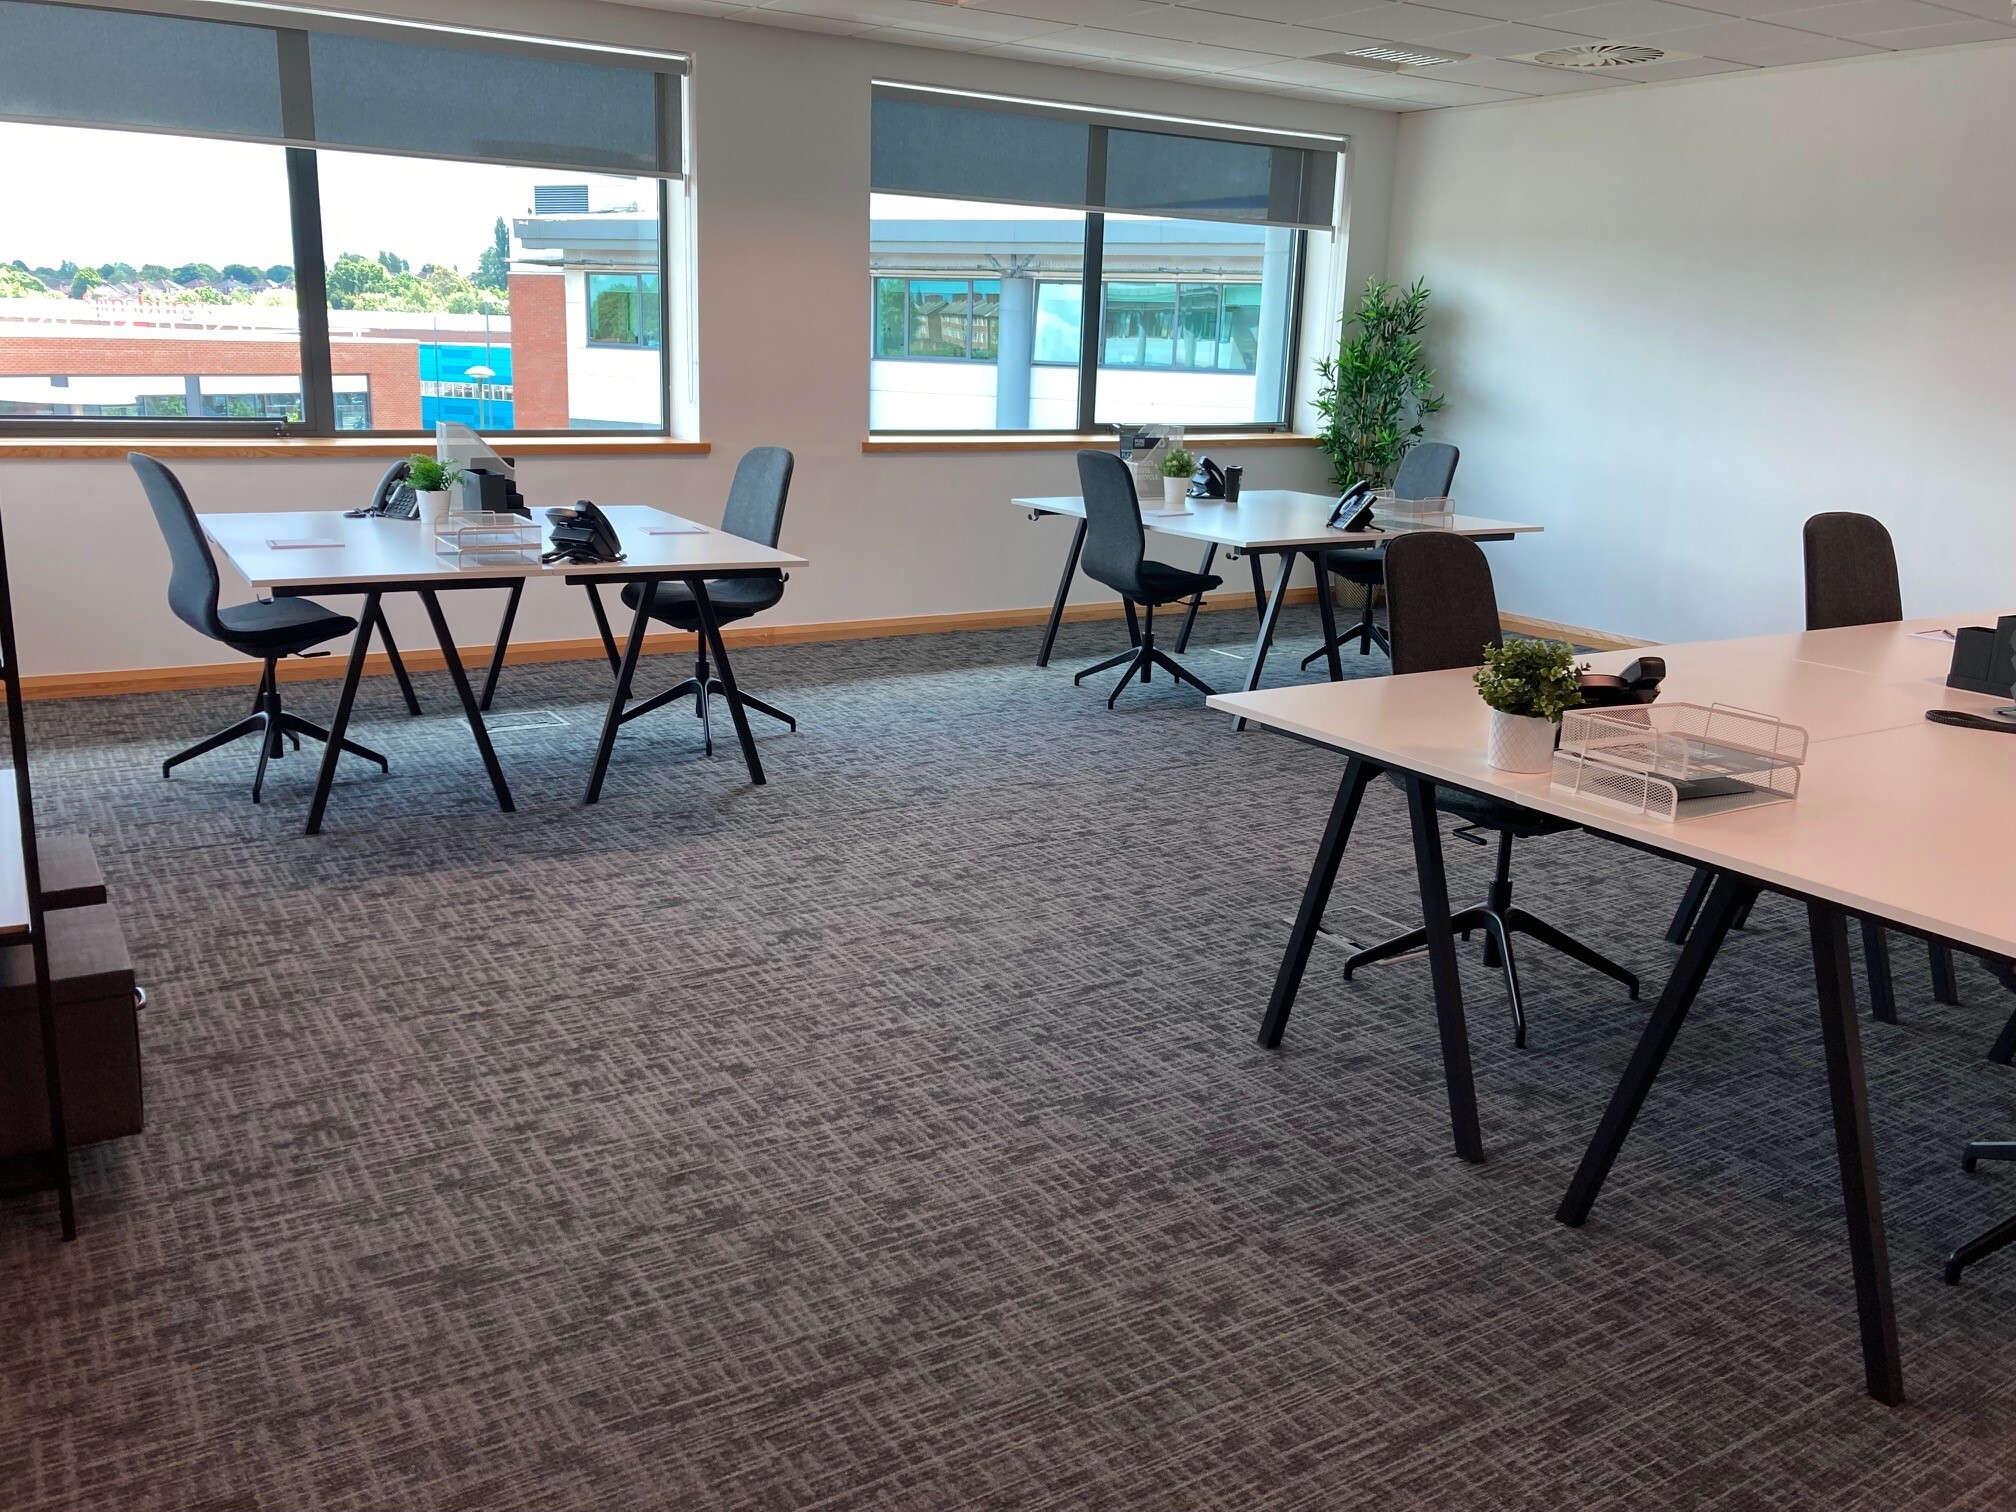 Desk Offices for 1- 30 people / Starting at £370Pcm